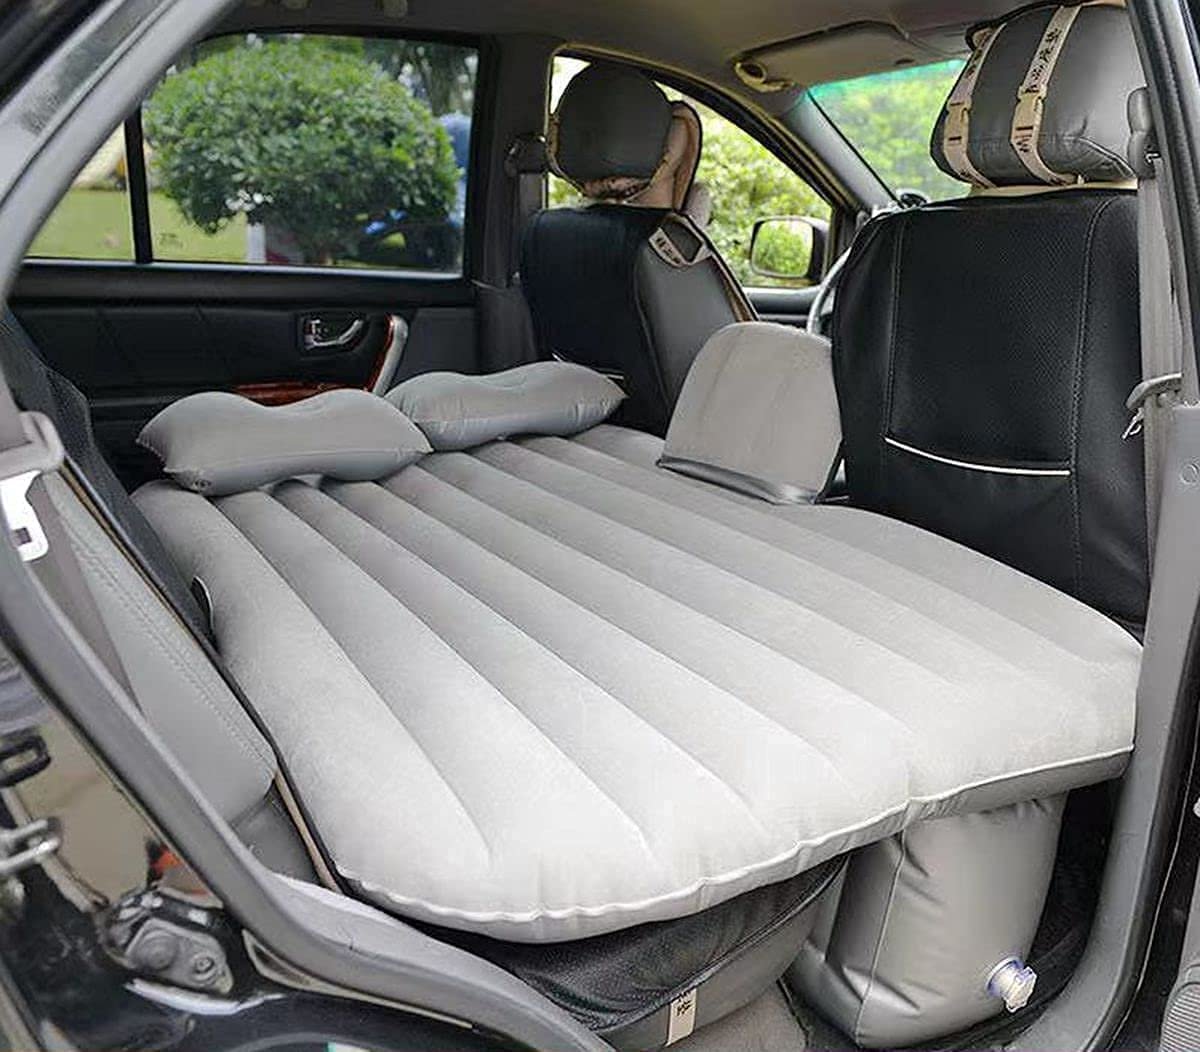 Car Bed Mattress Universal Car Back Seat Travel Air Inflation with Two Pillows, Air Pump and Repair Kit (Silver) Image 